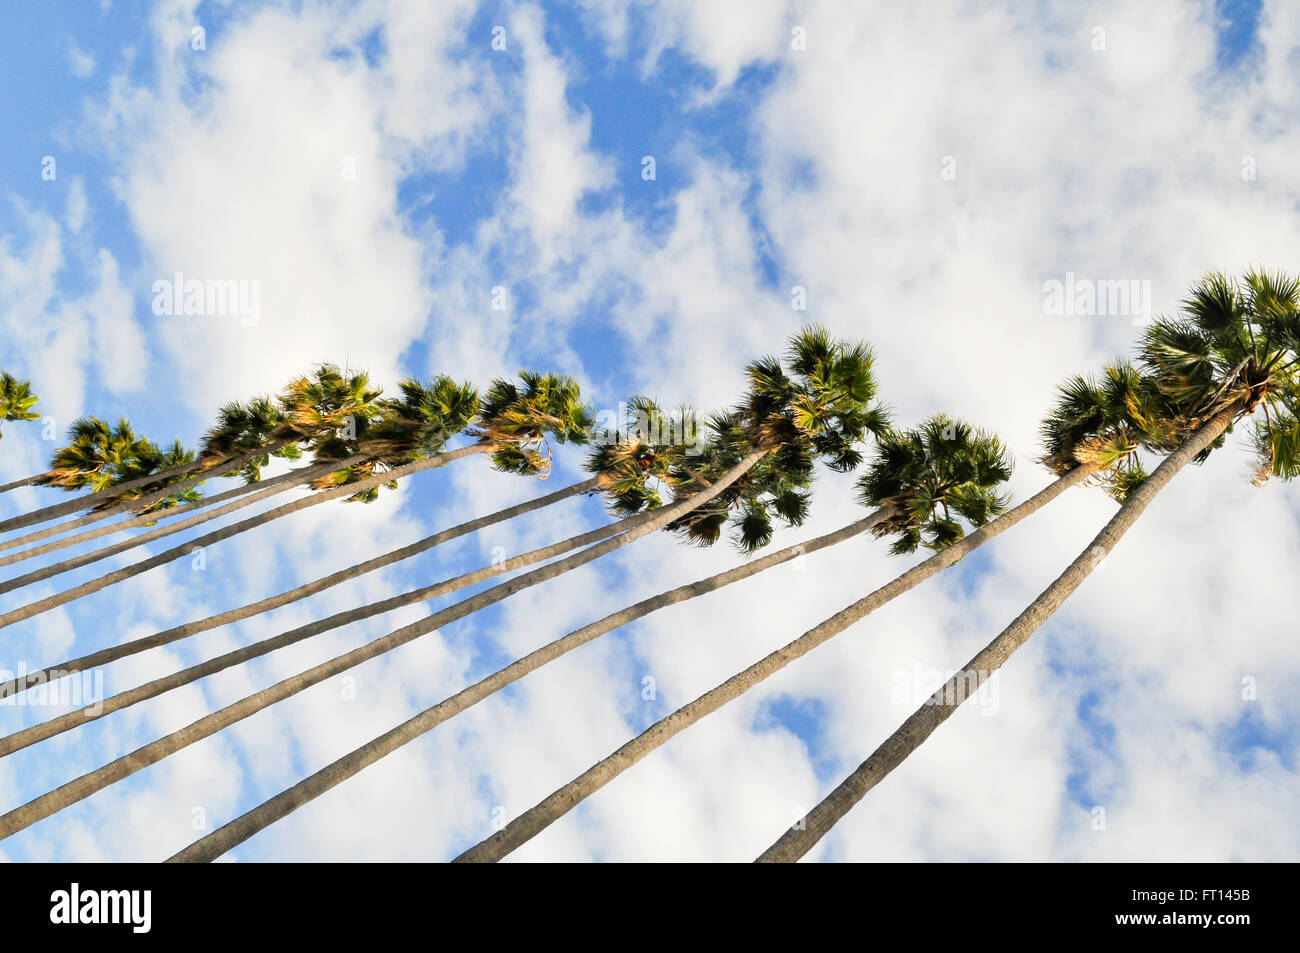 A row of very tall palm trees viewed from directly below Stock Photo